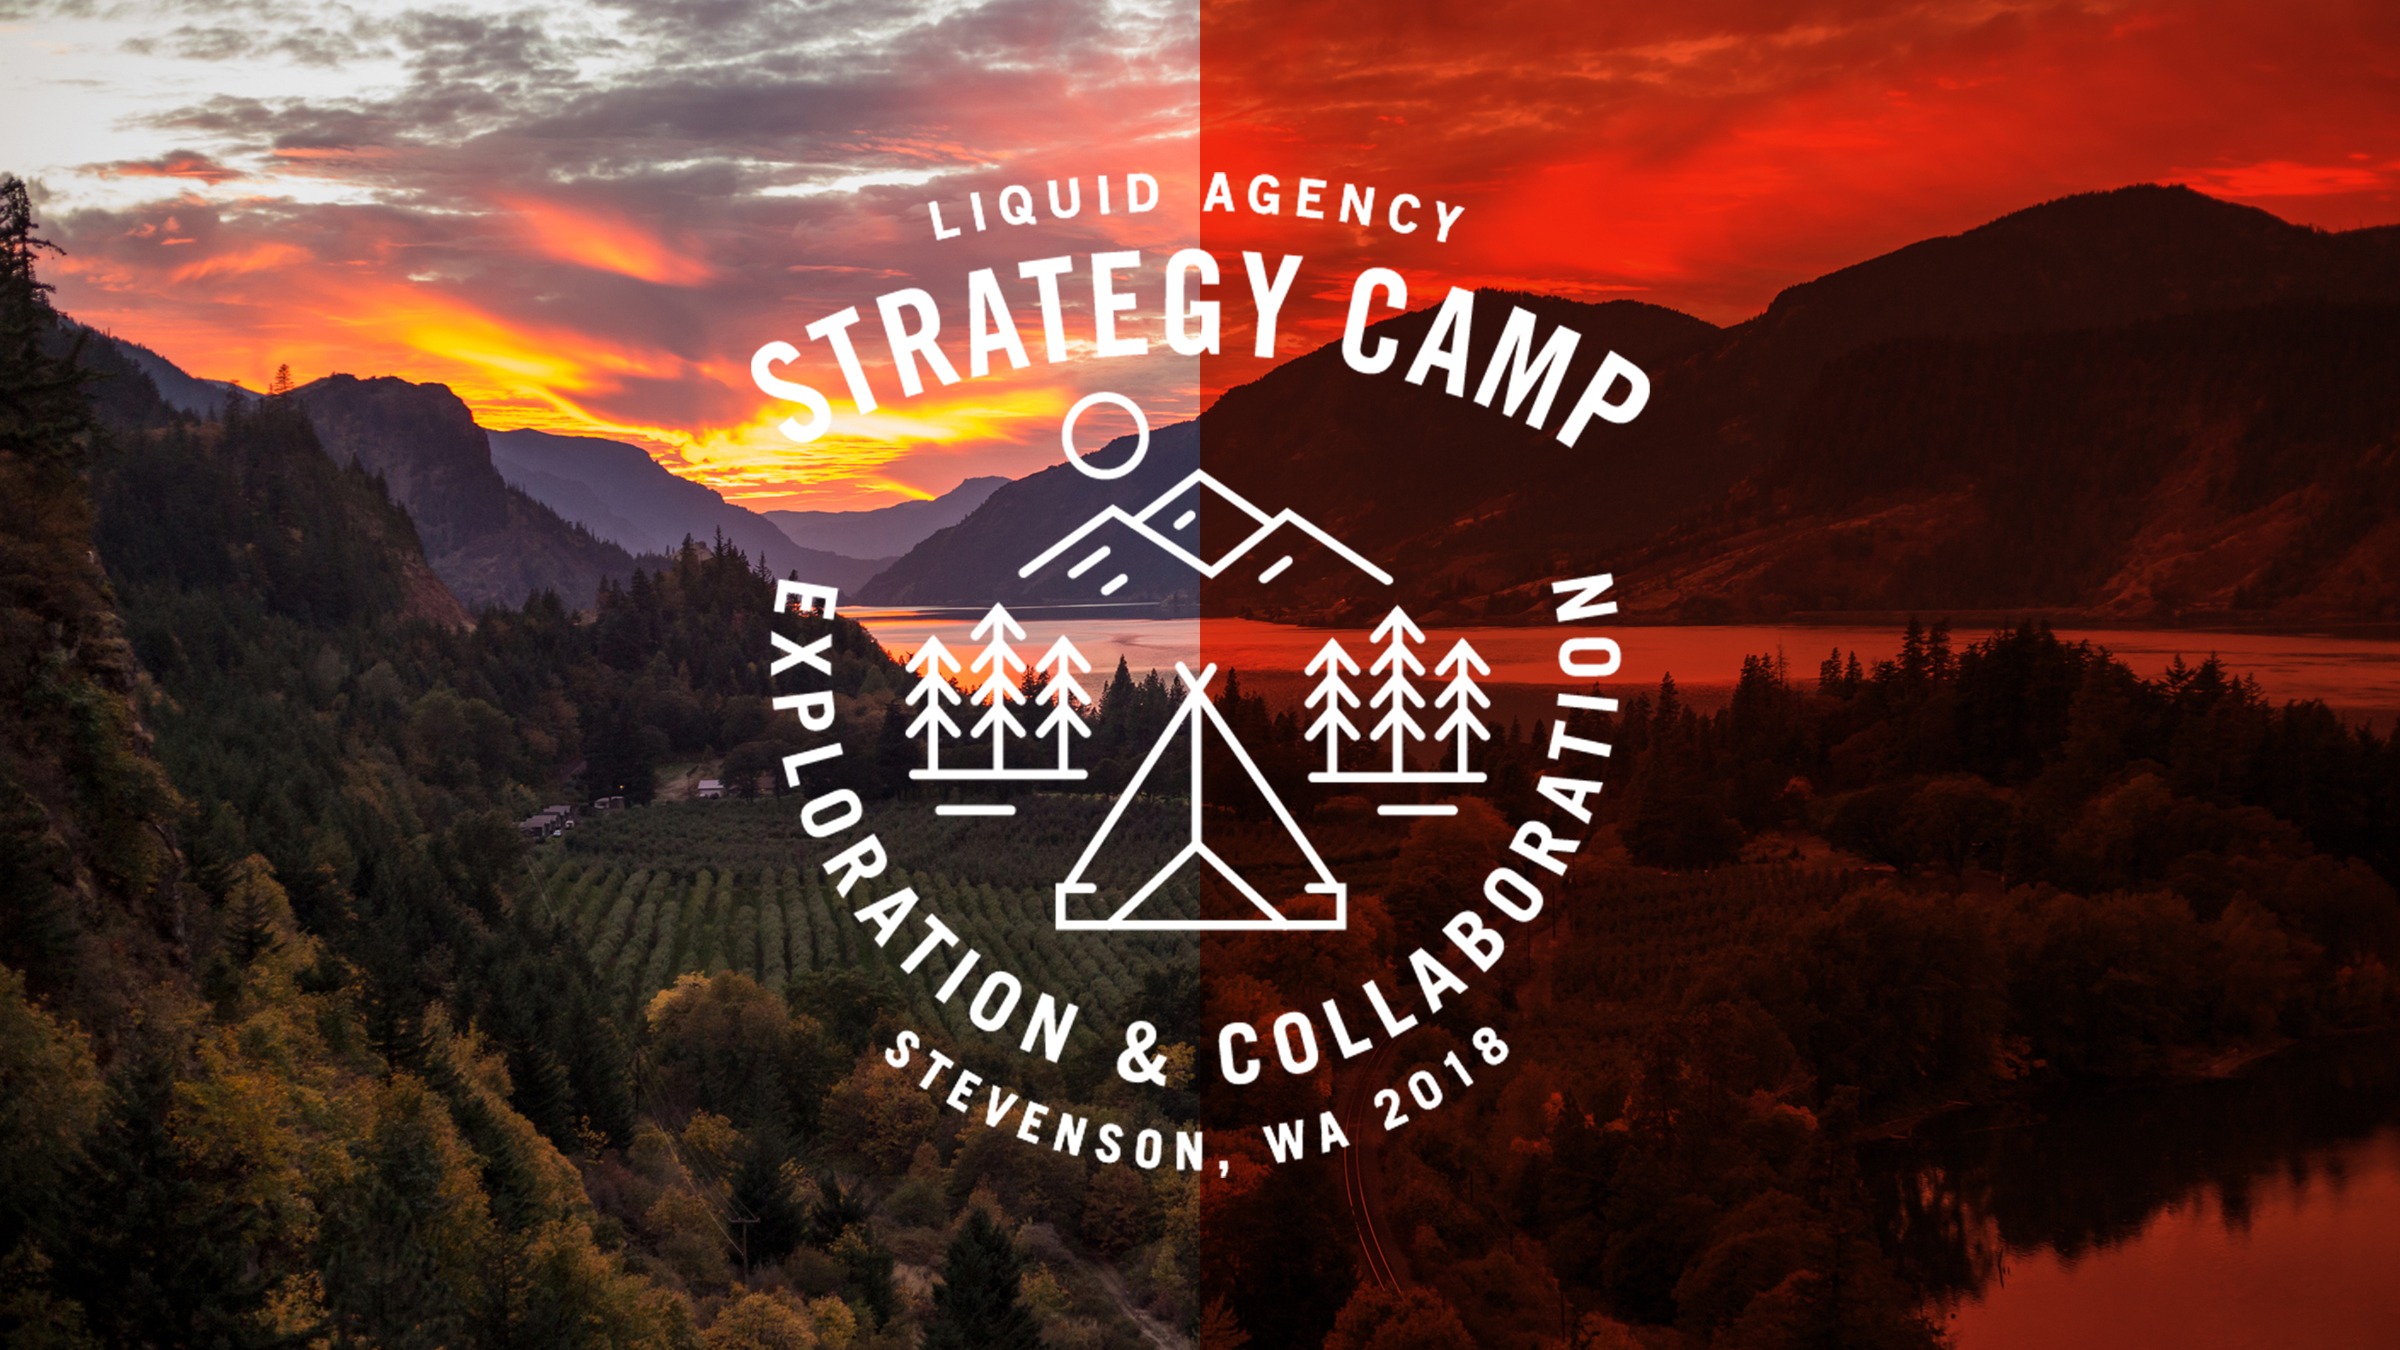 entering strategy camp